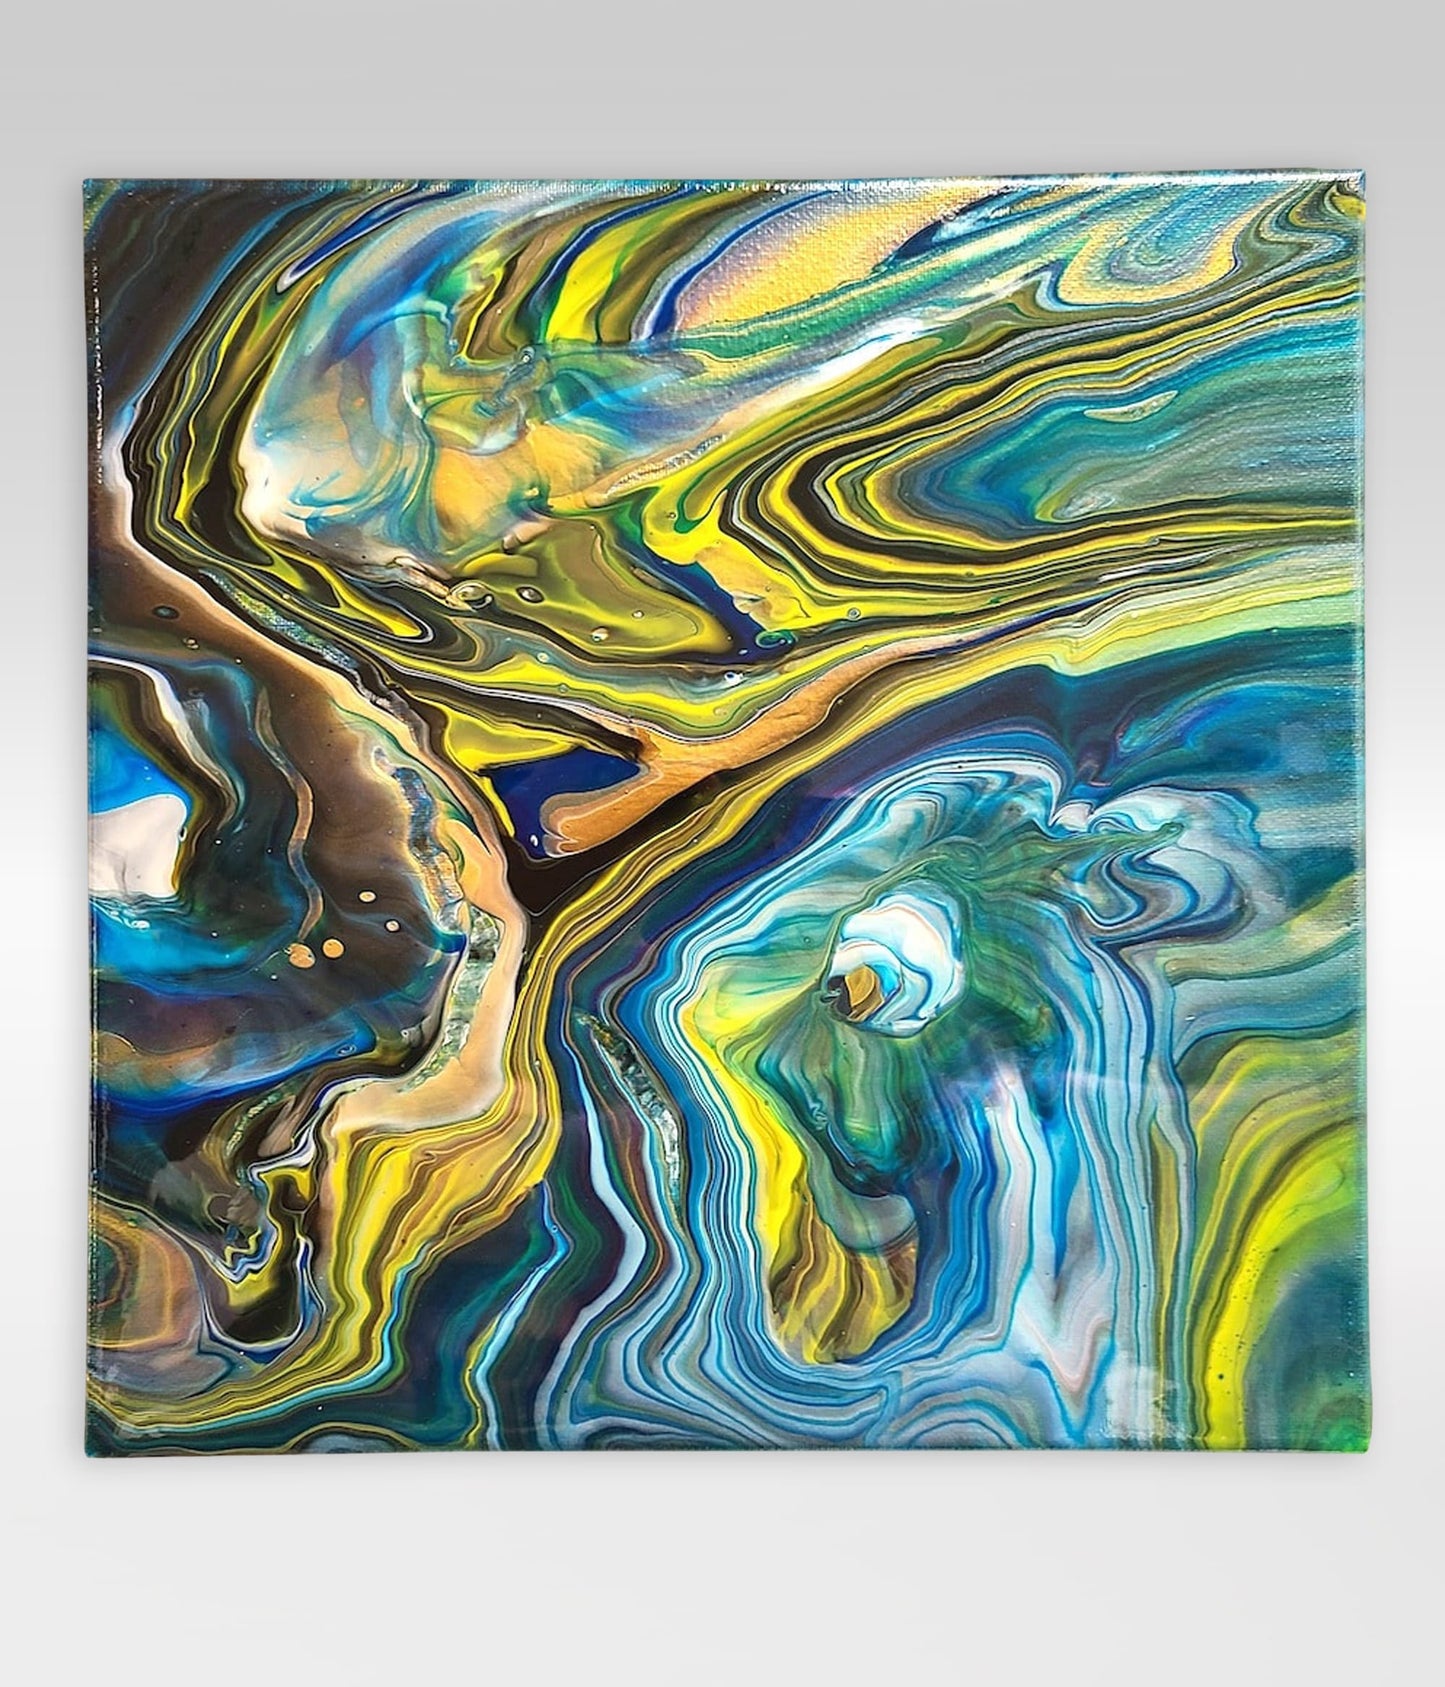 This Is 2020 – 12 x 12 Resin Painting On Canvas